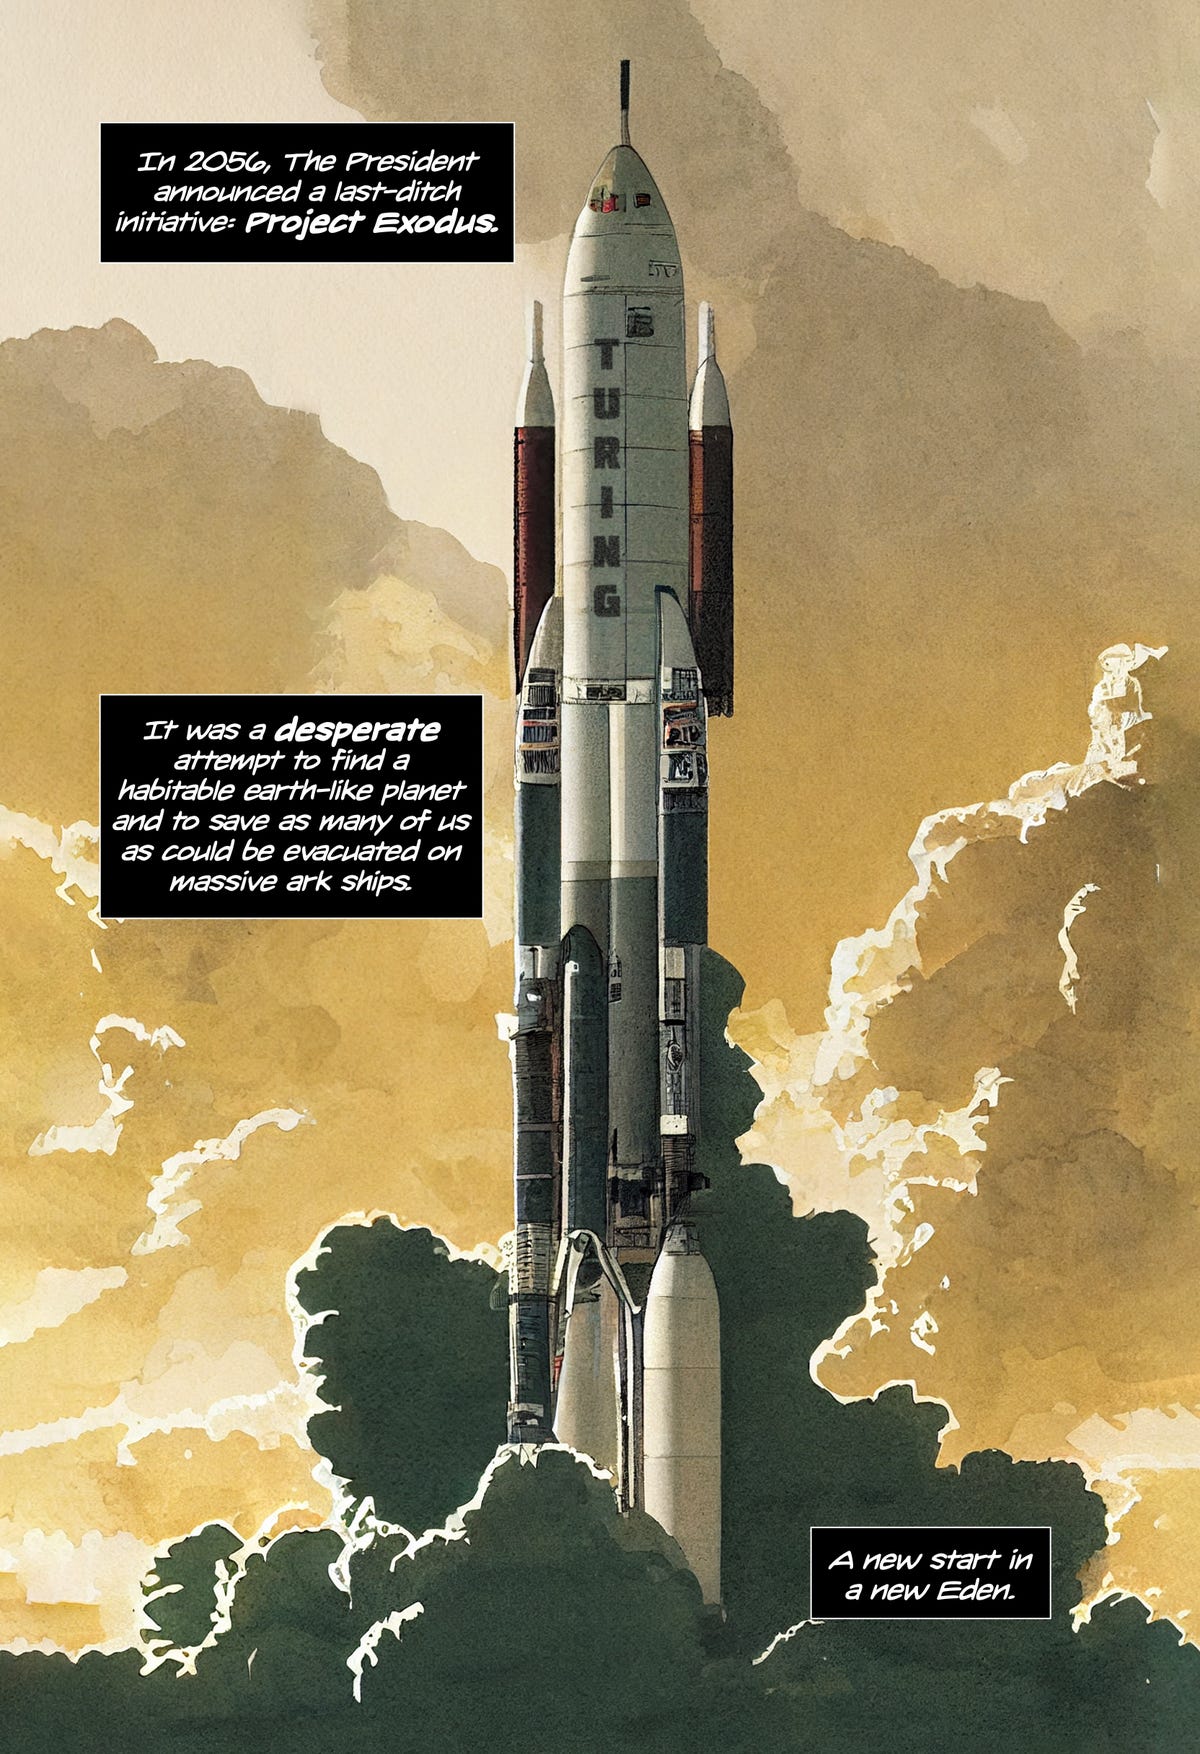 Page from The Exodus, showing rockets pointing up